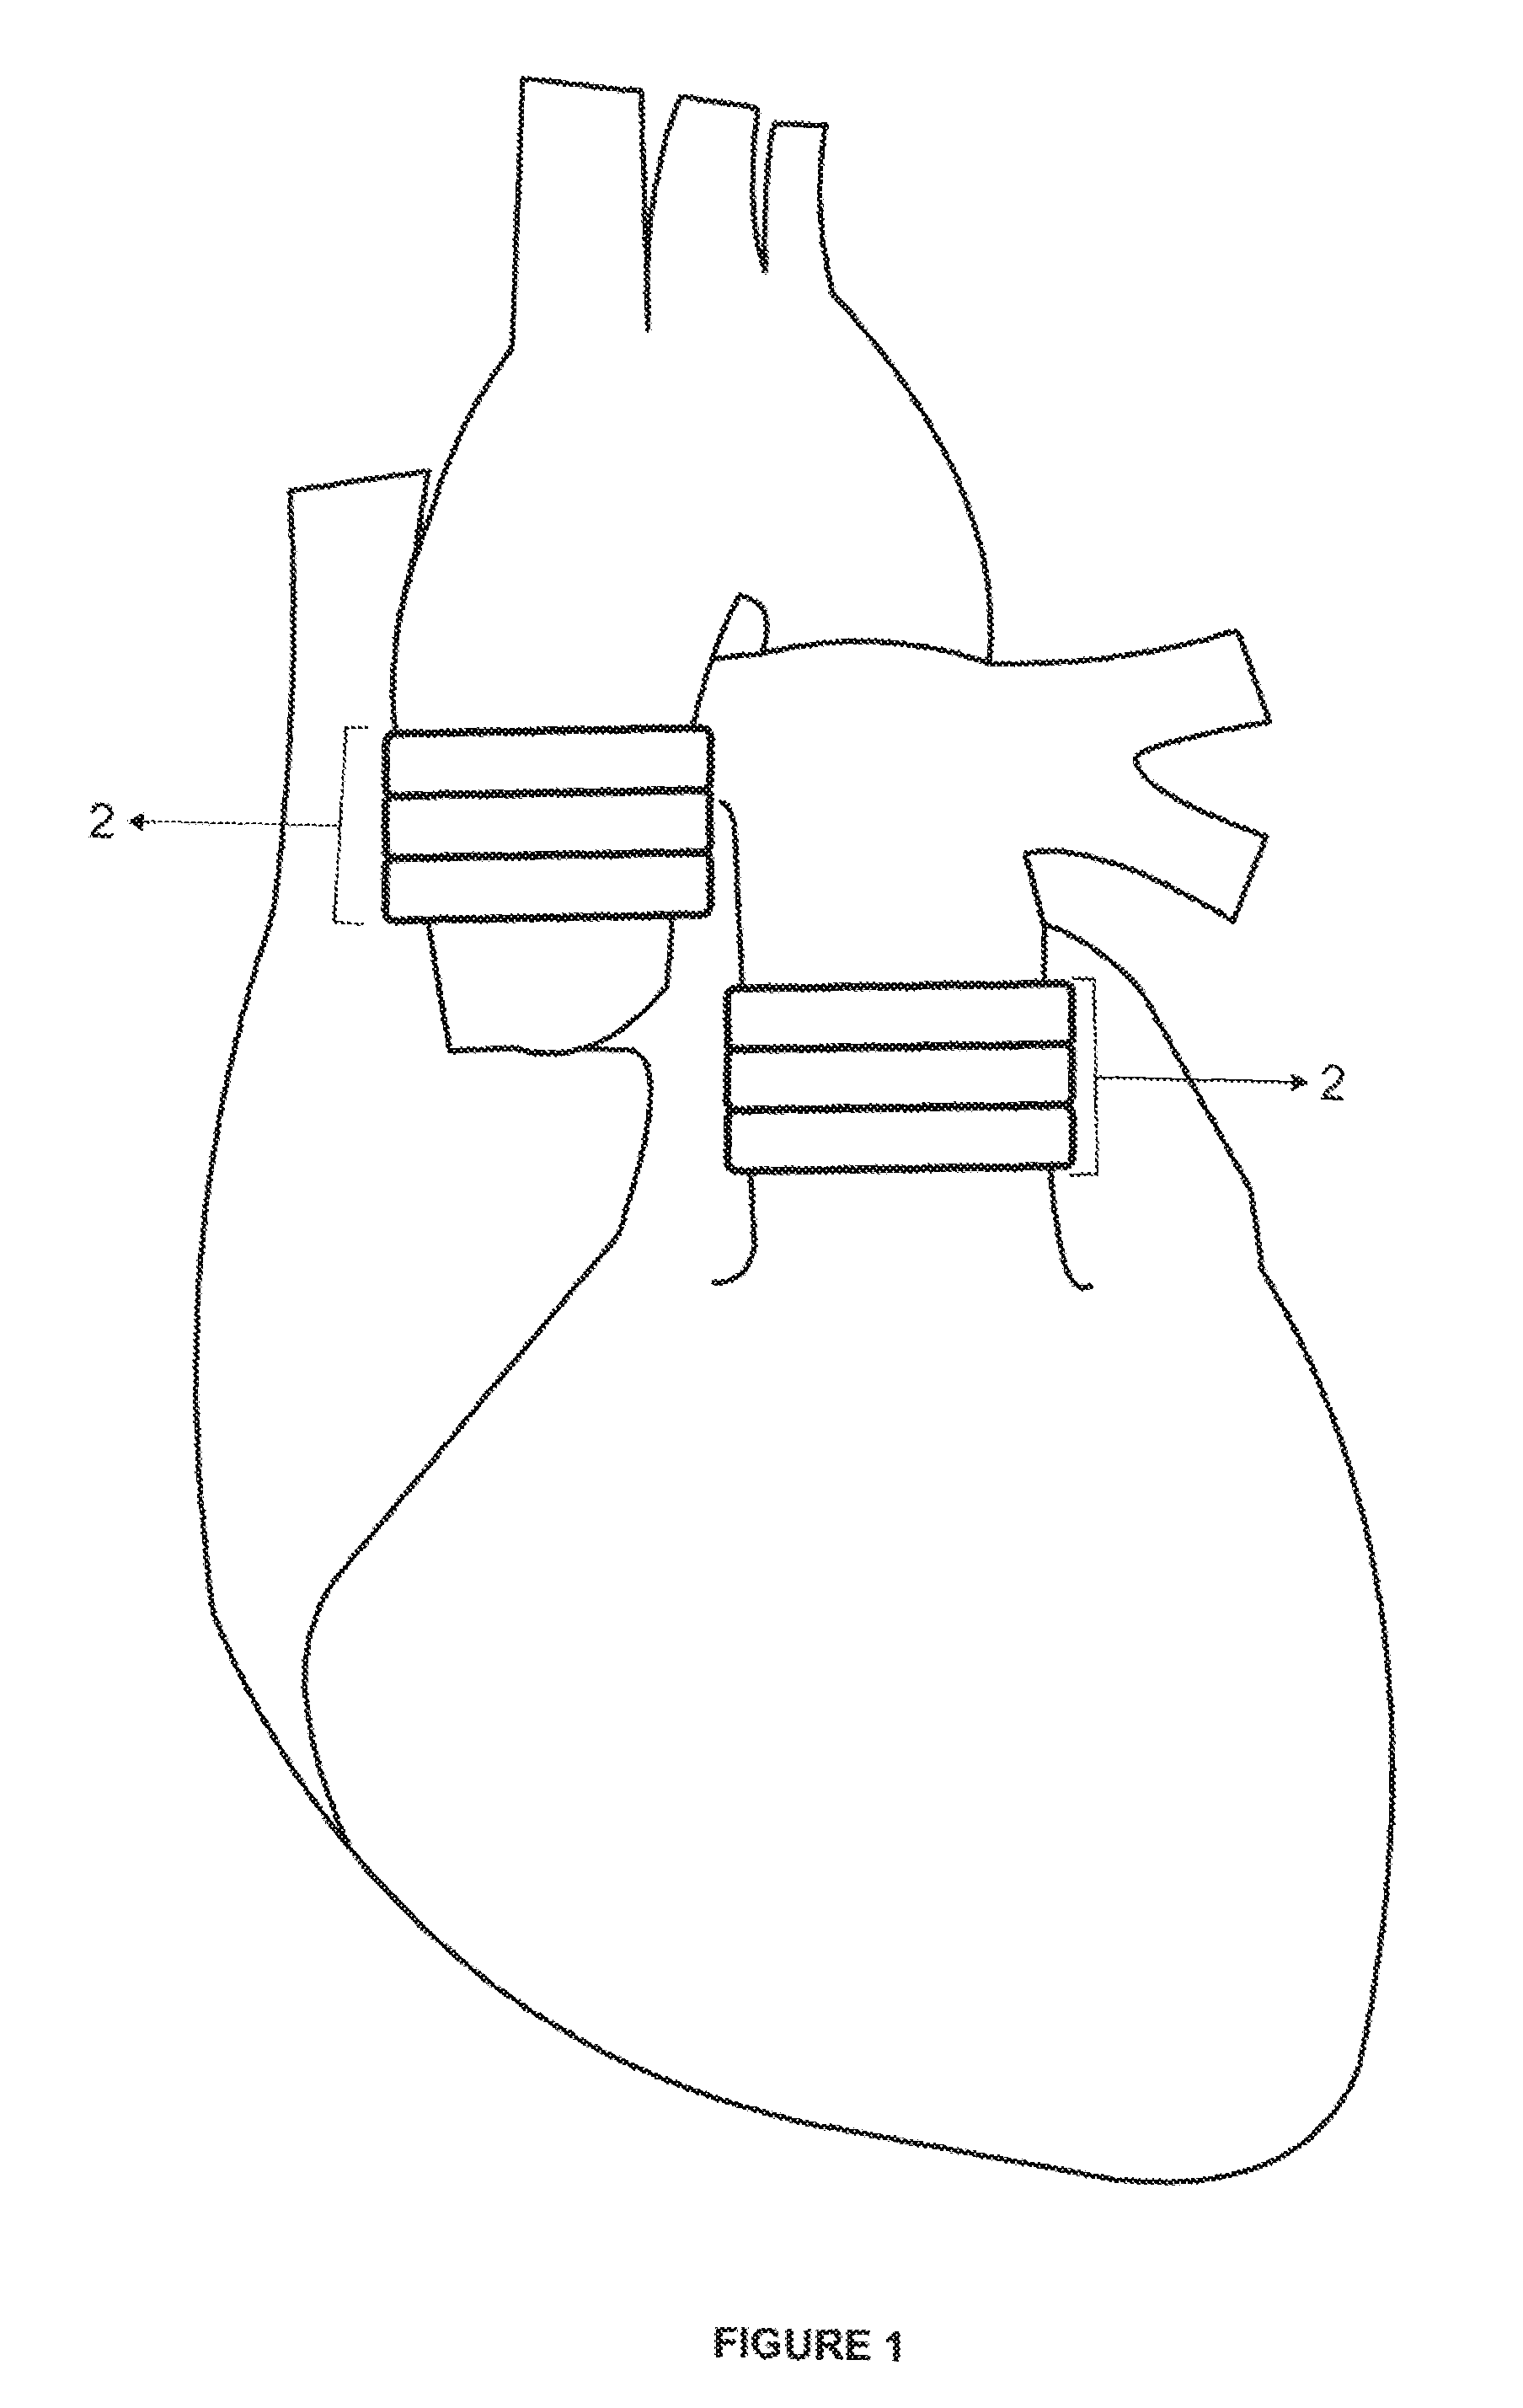 Endovascular heart assist device